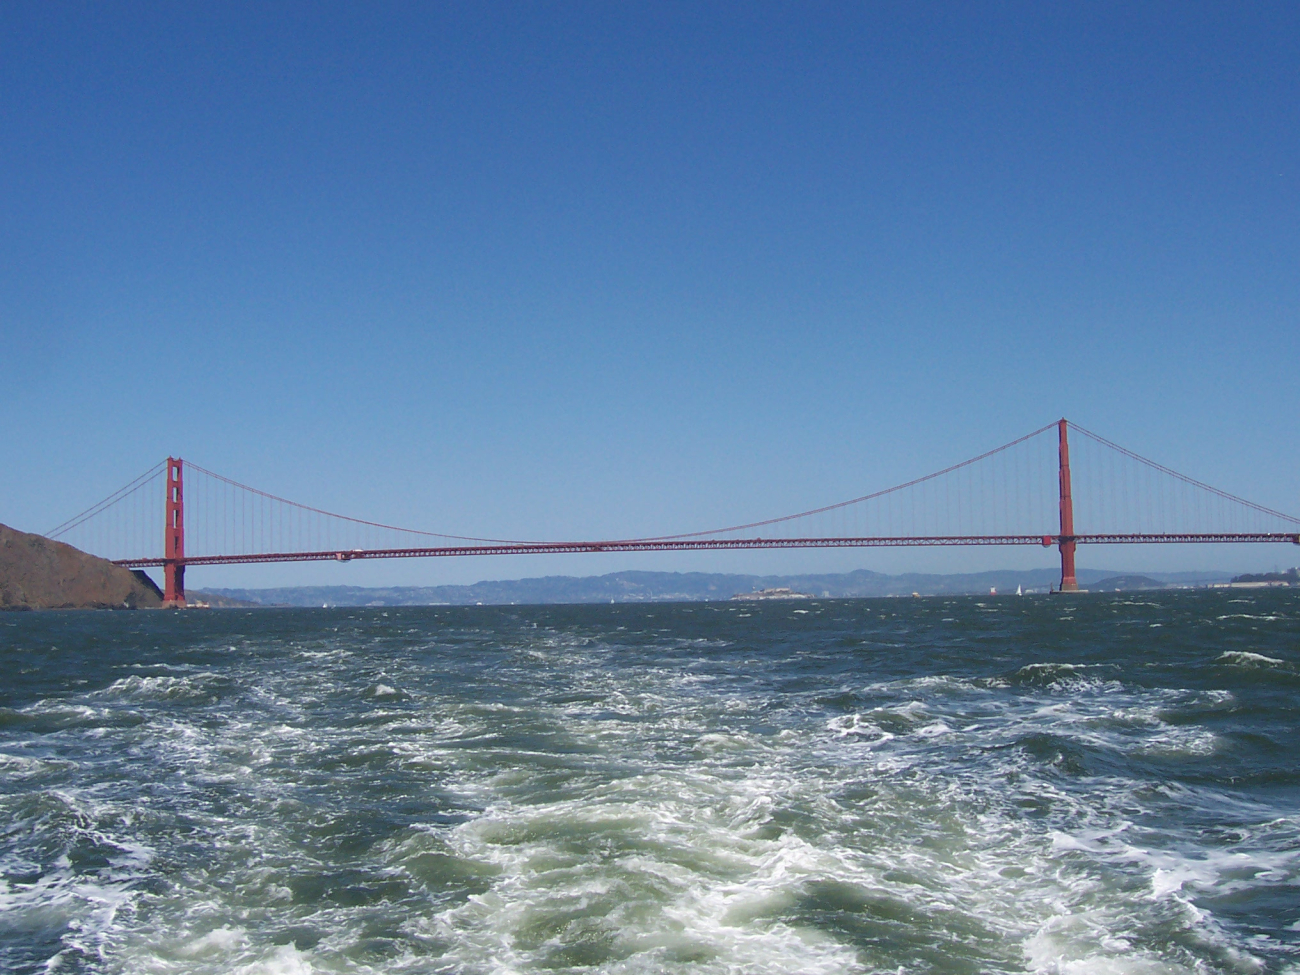 The Golden Gate Bridge seen astern with Alcatraz Island in theright center